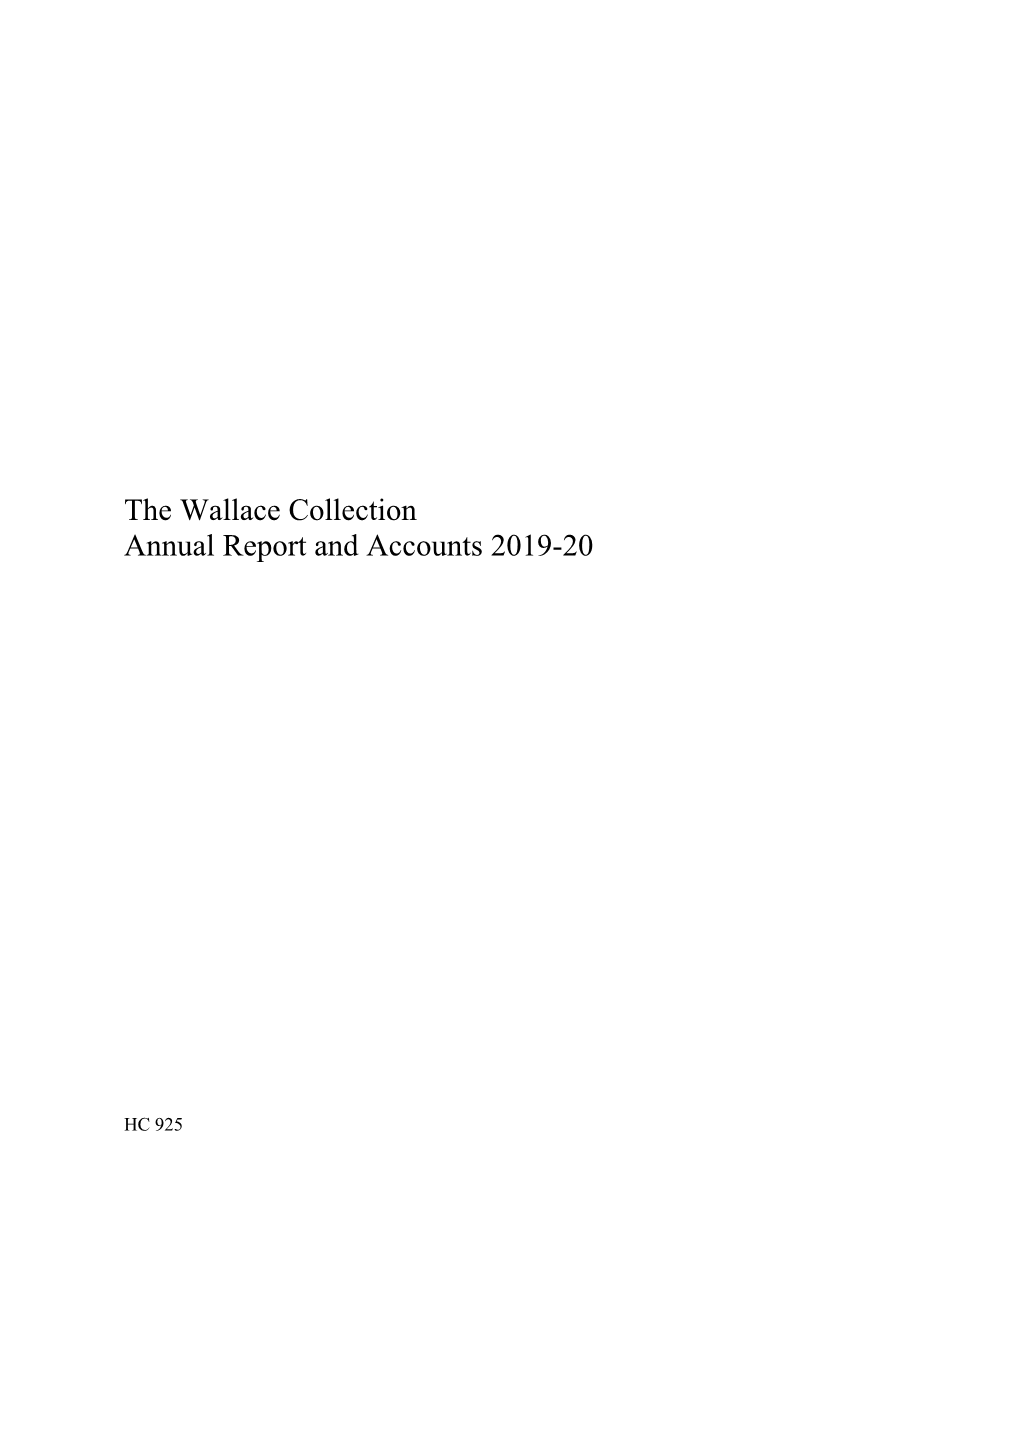 The Wallace Collection Annual Report and Accounts 2019-20